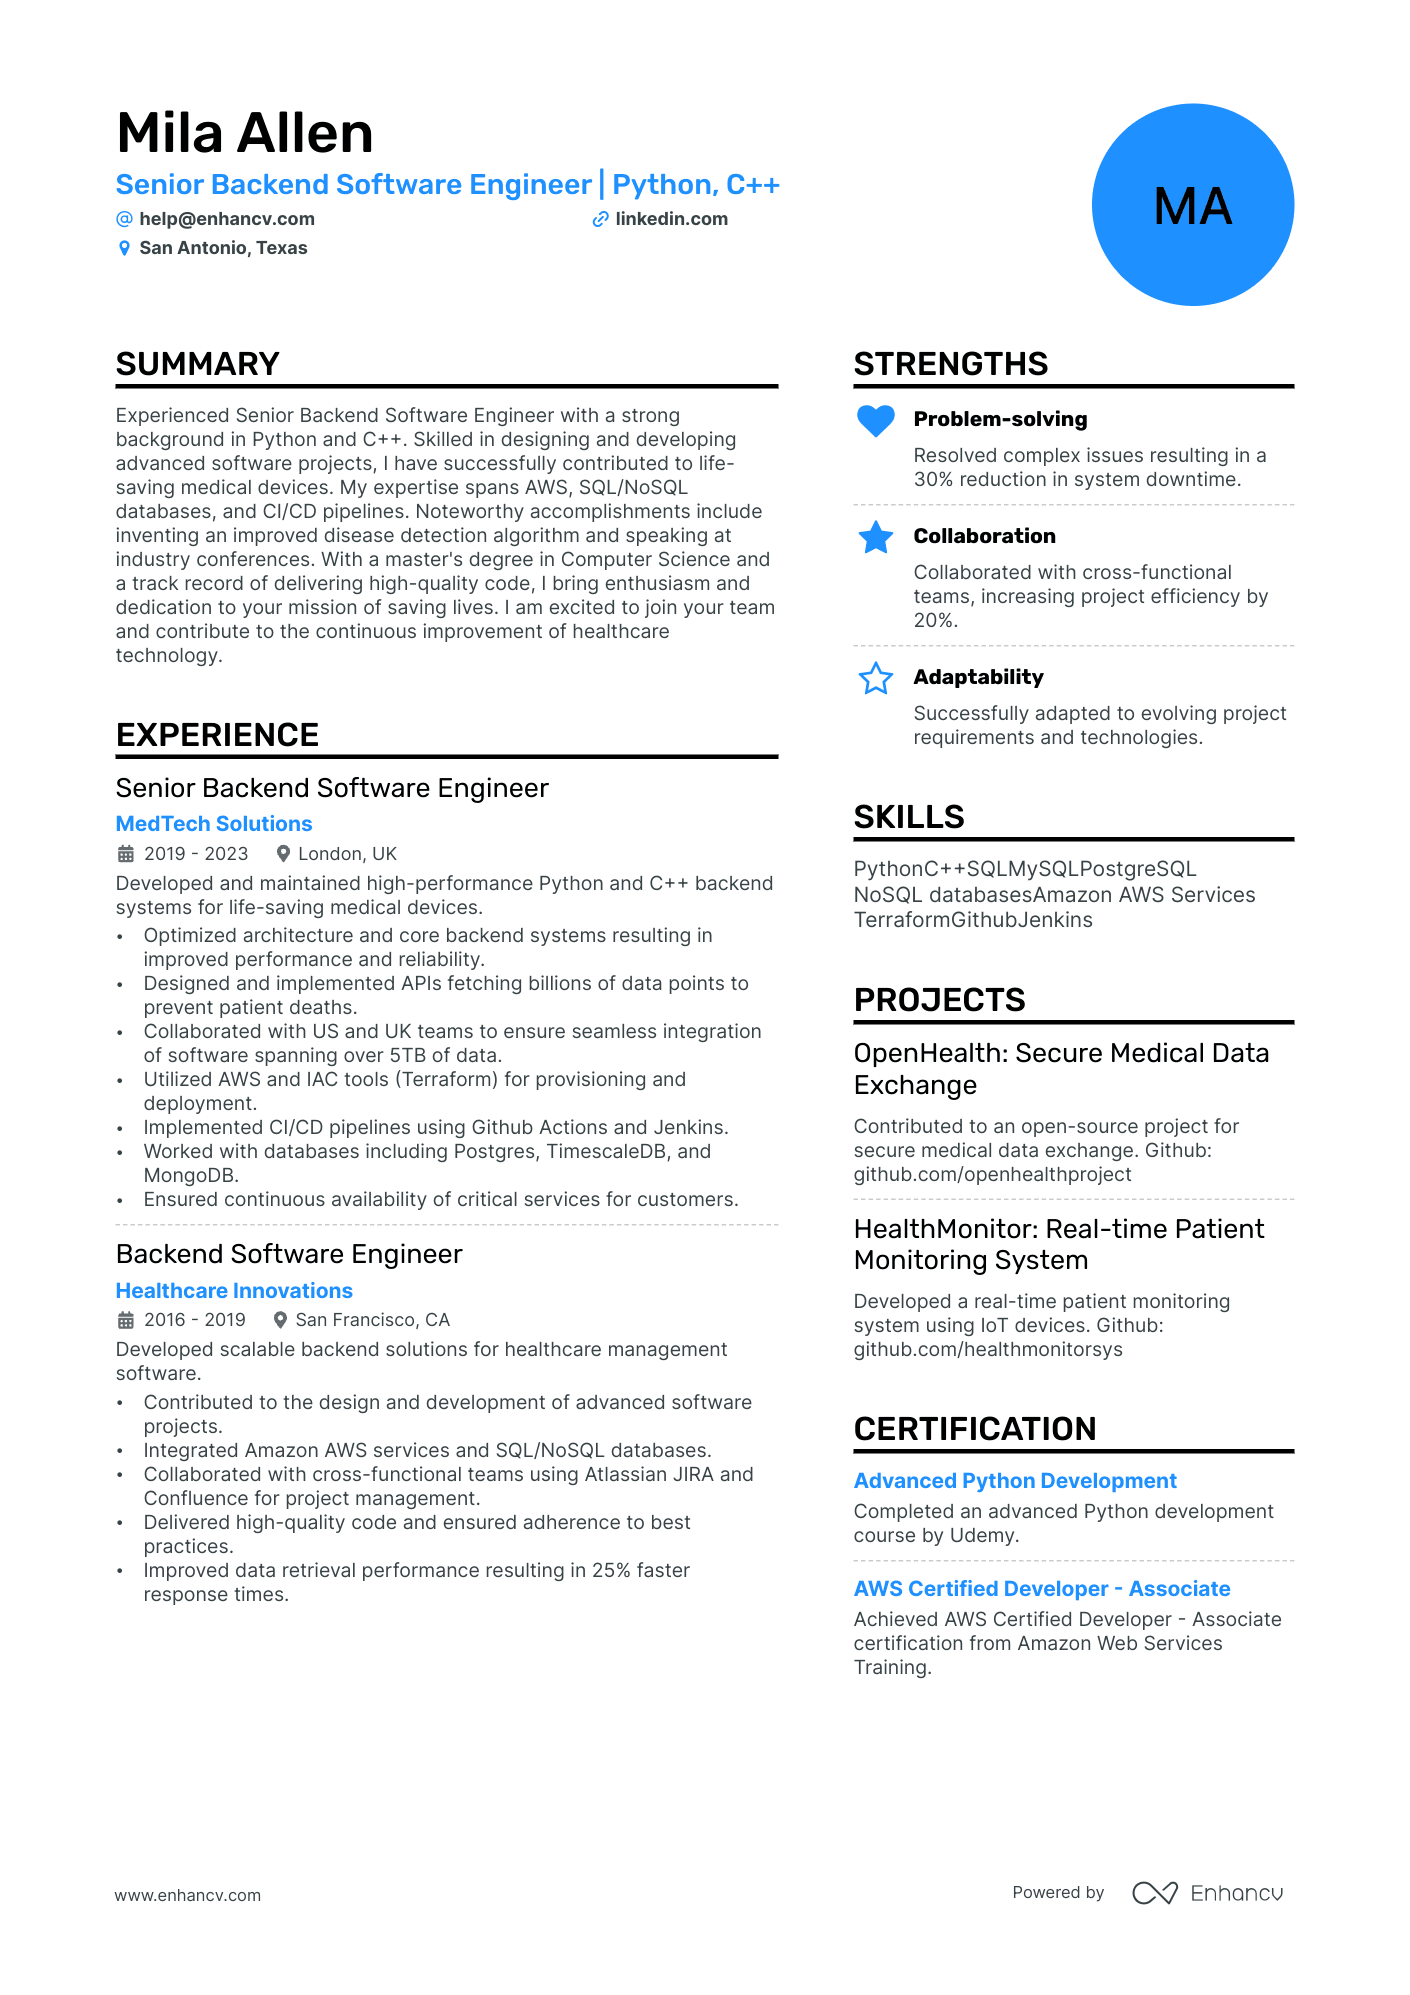 electrical engineering projects for resume